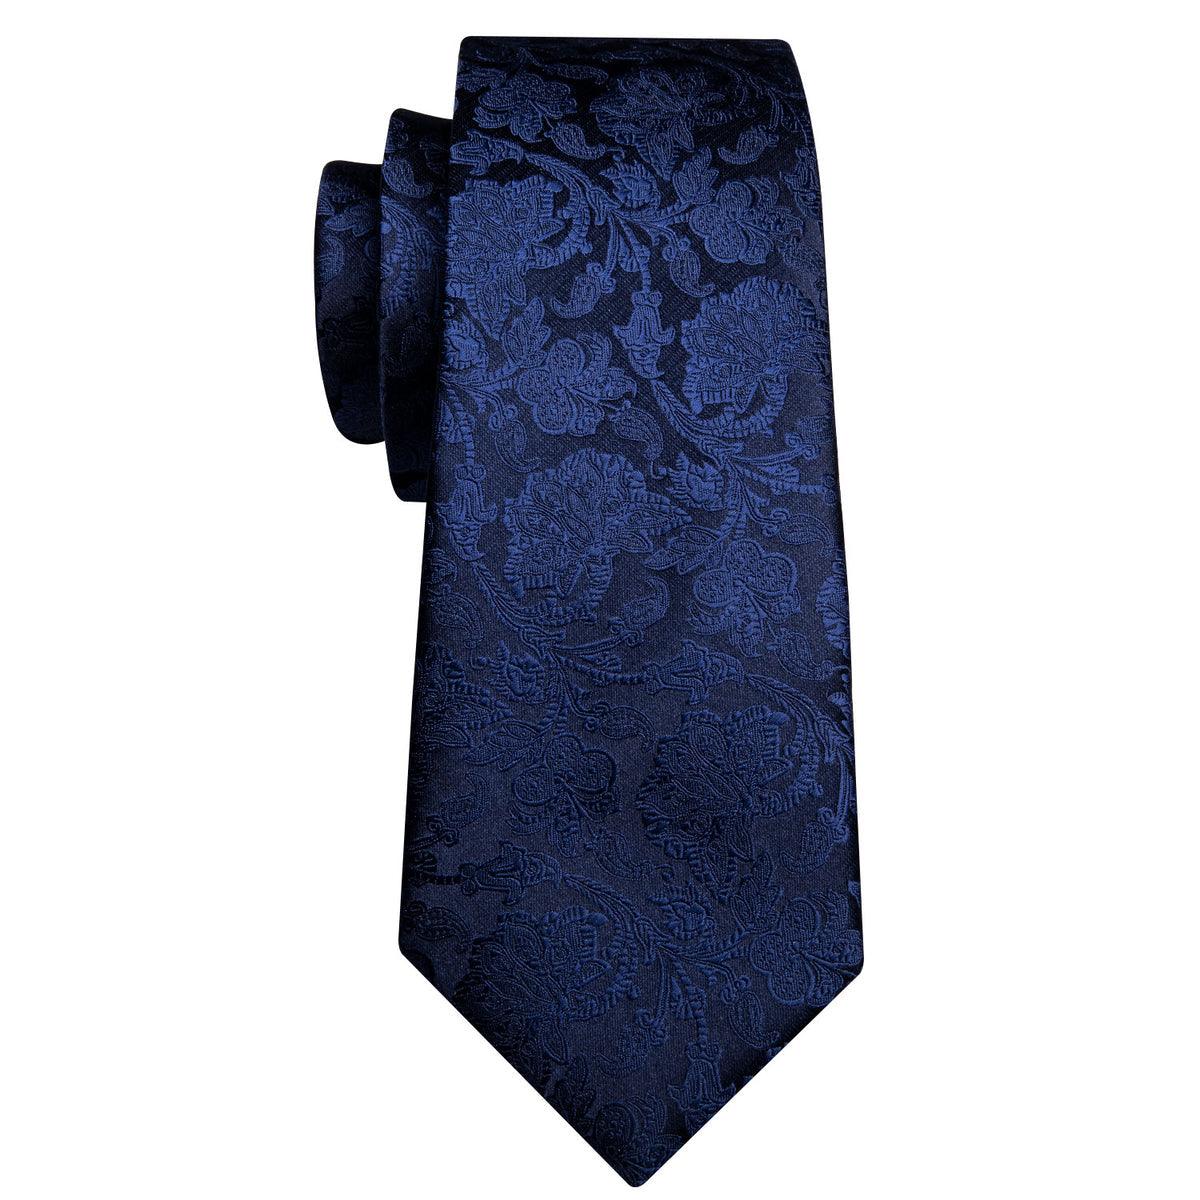 Extra Long Navy Blue Floral Tie Pocket Square Cufflink Set - STYLETIE